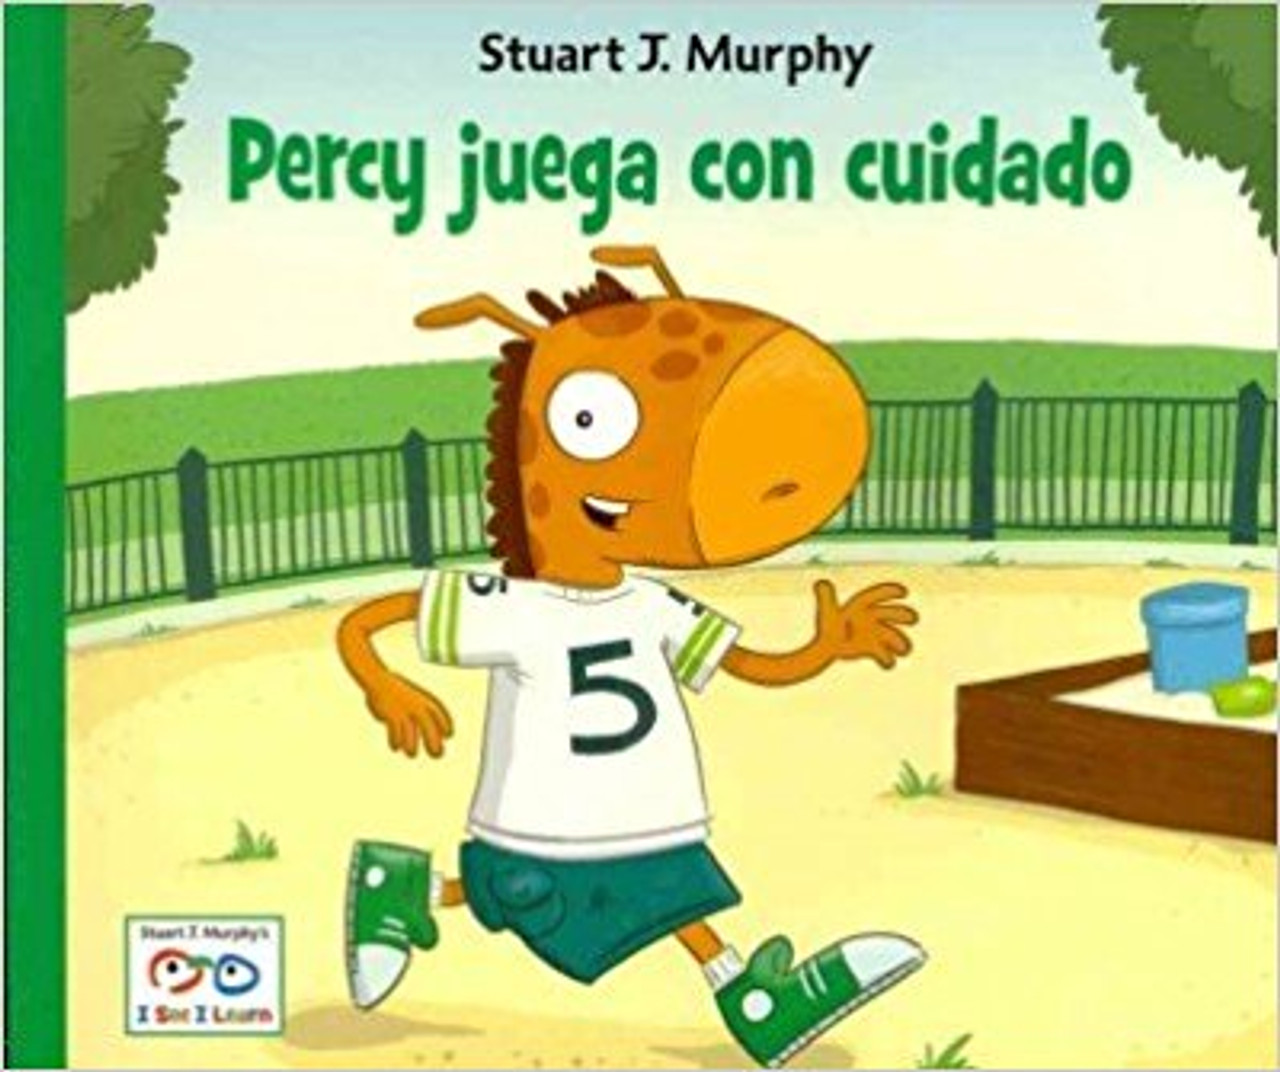 After playing boisterously at the playground, Percy learns how to keep himself and his friends safe and still have a good time. Includes questions about the text and a note to parents about visual learning.